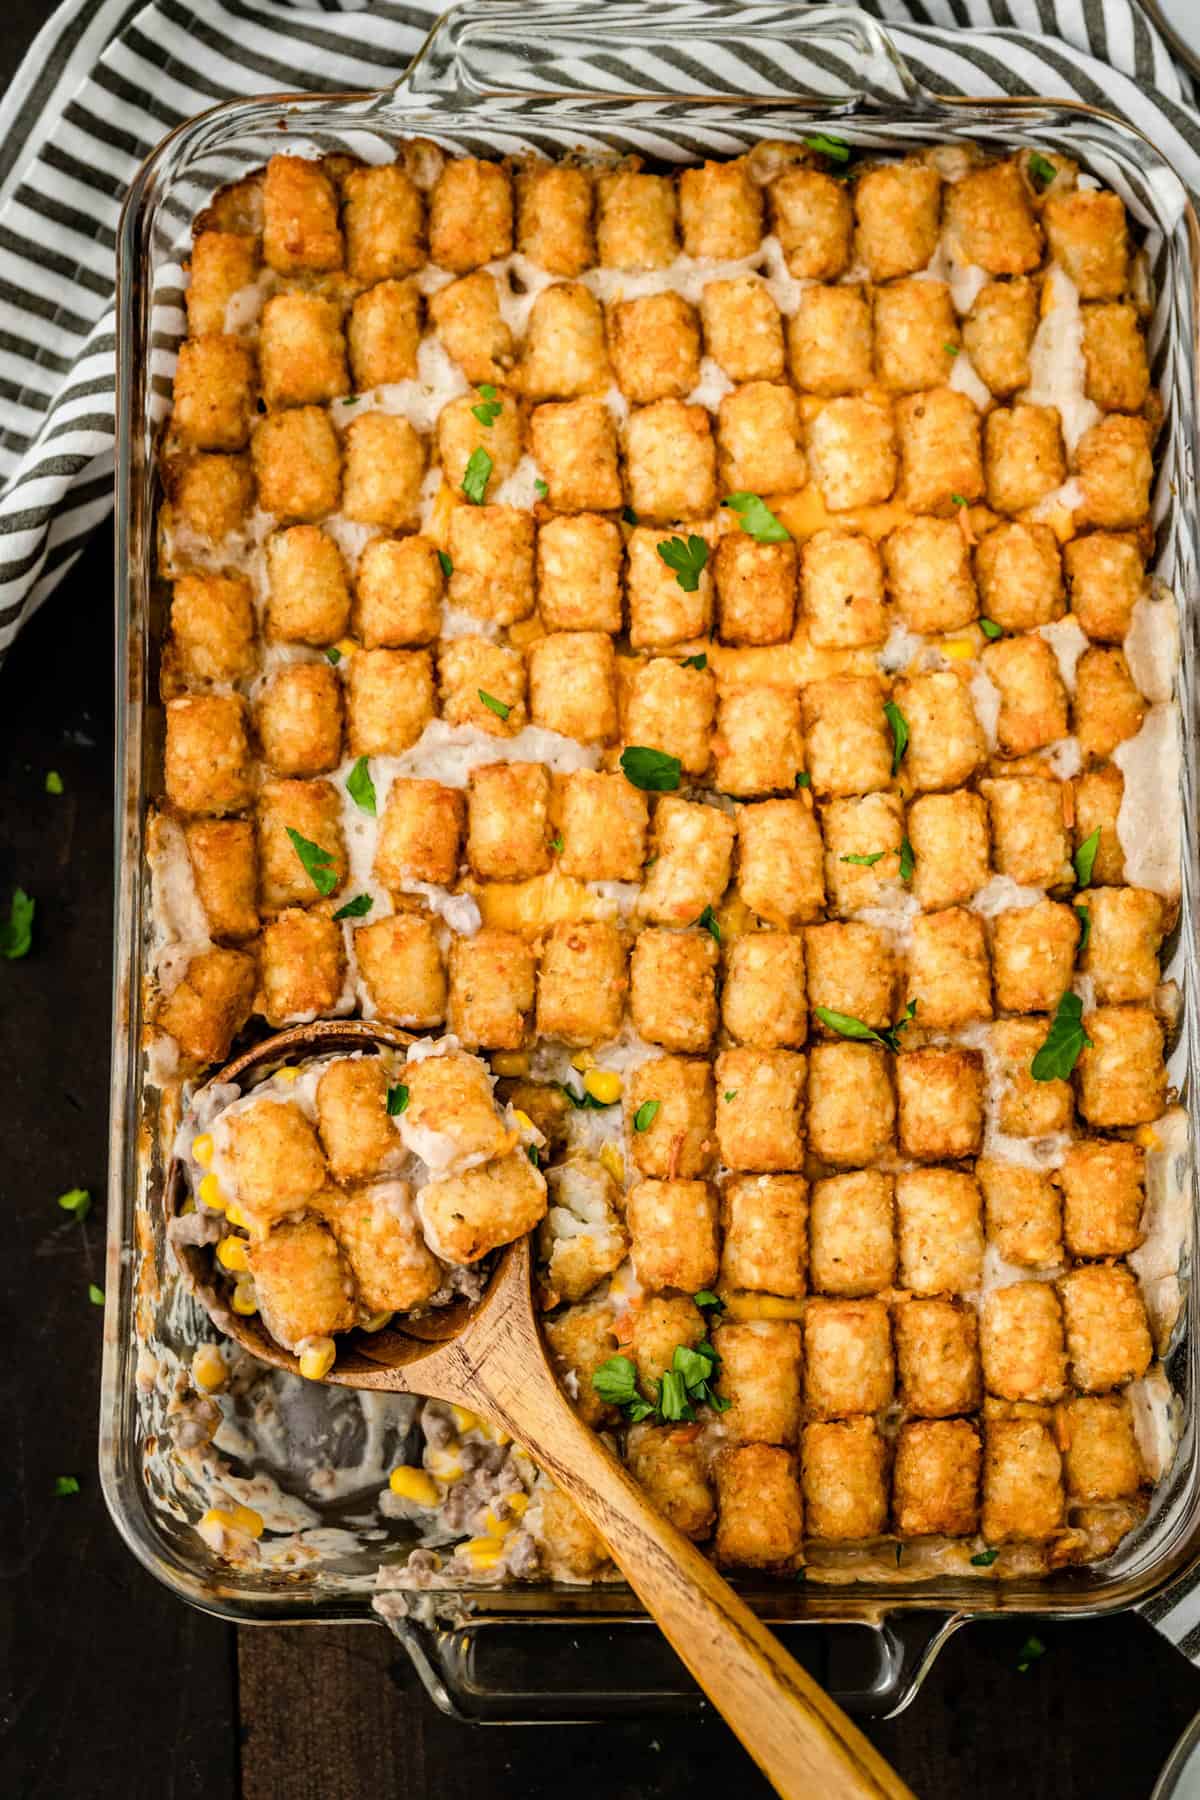 Tator Tot Hotdish just out of the oven in baking dish with wooden sppon